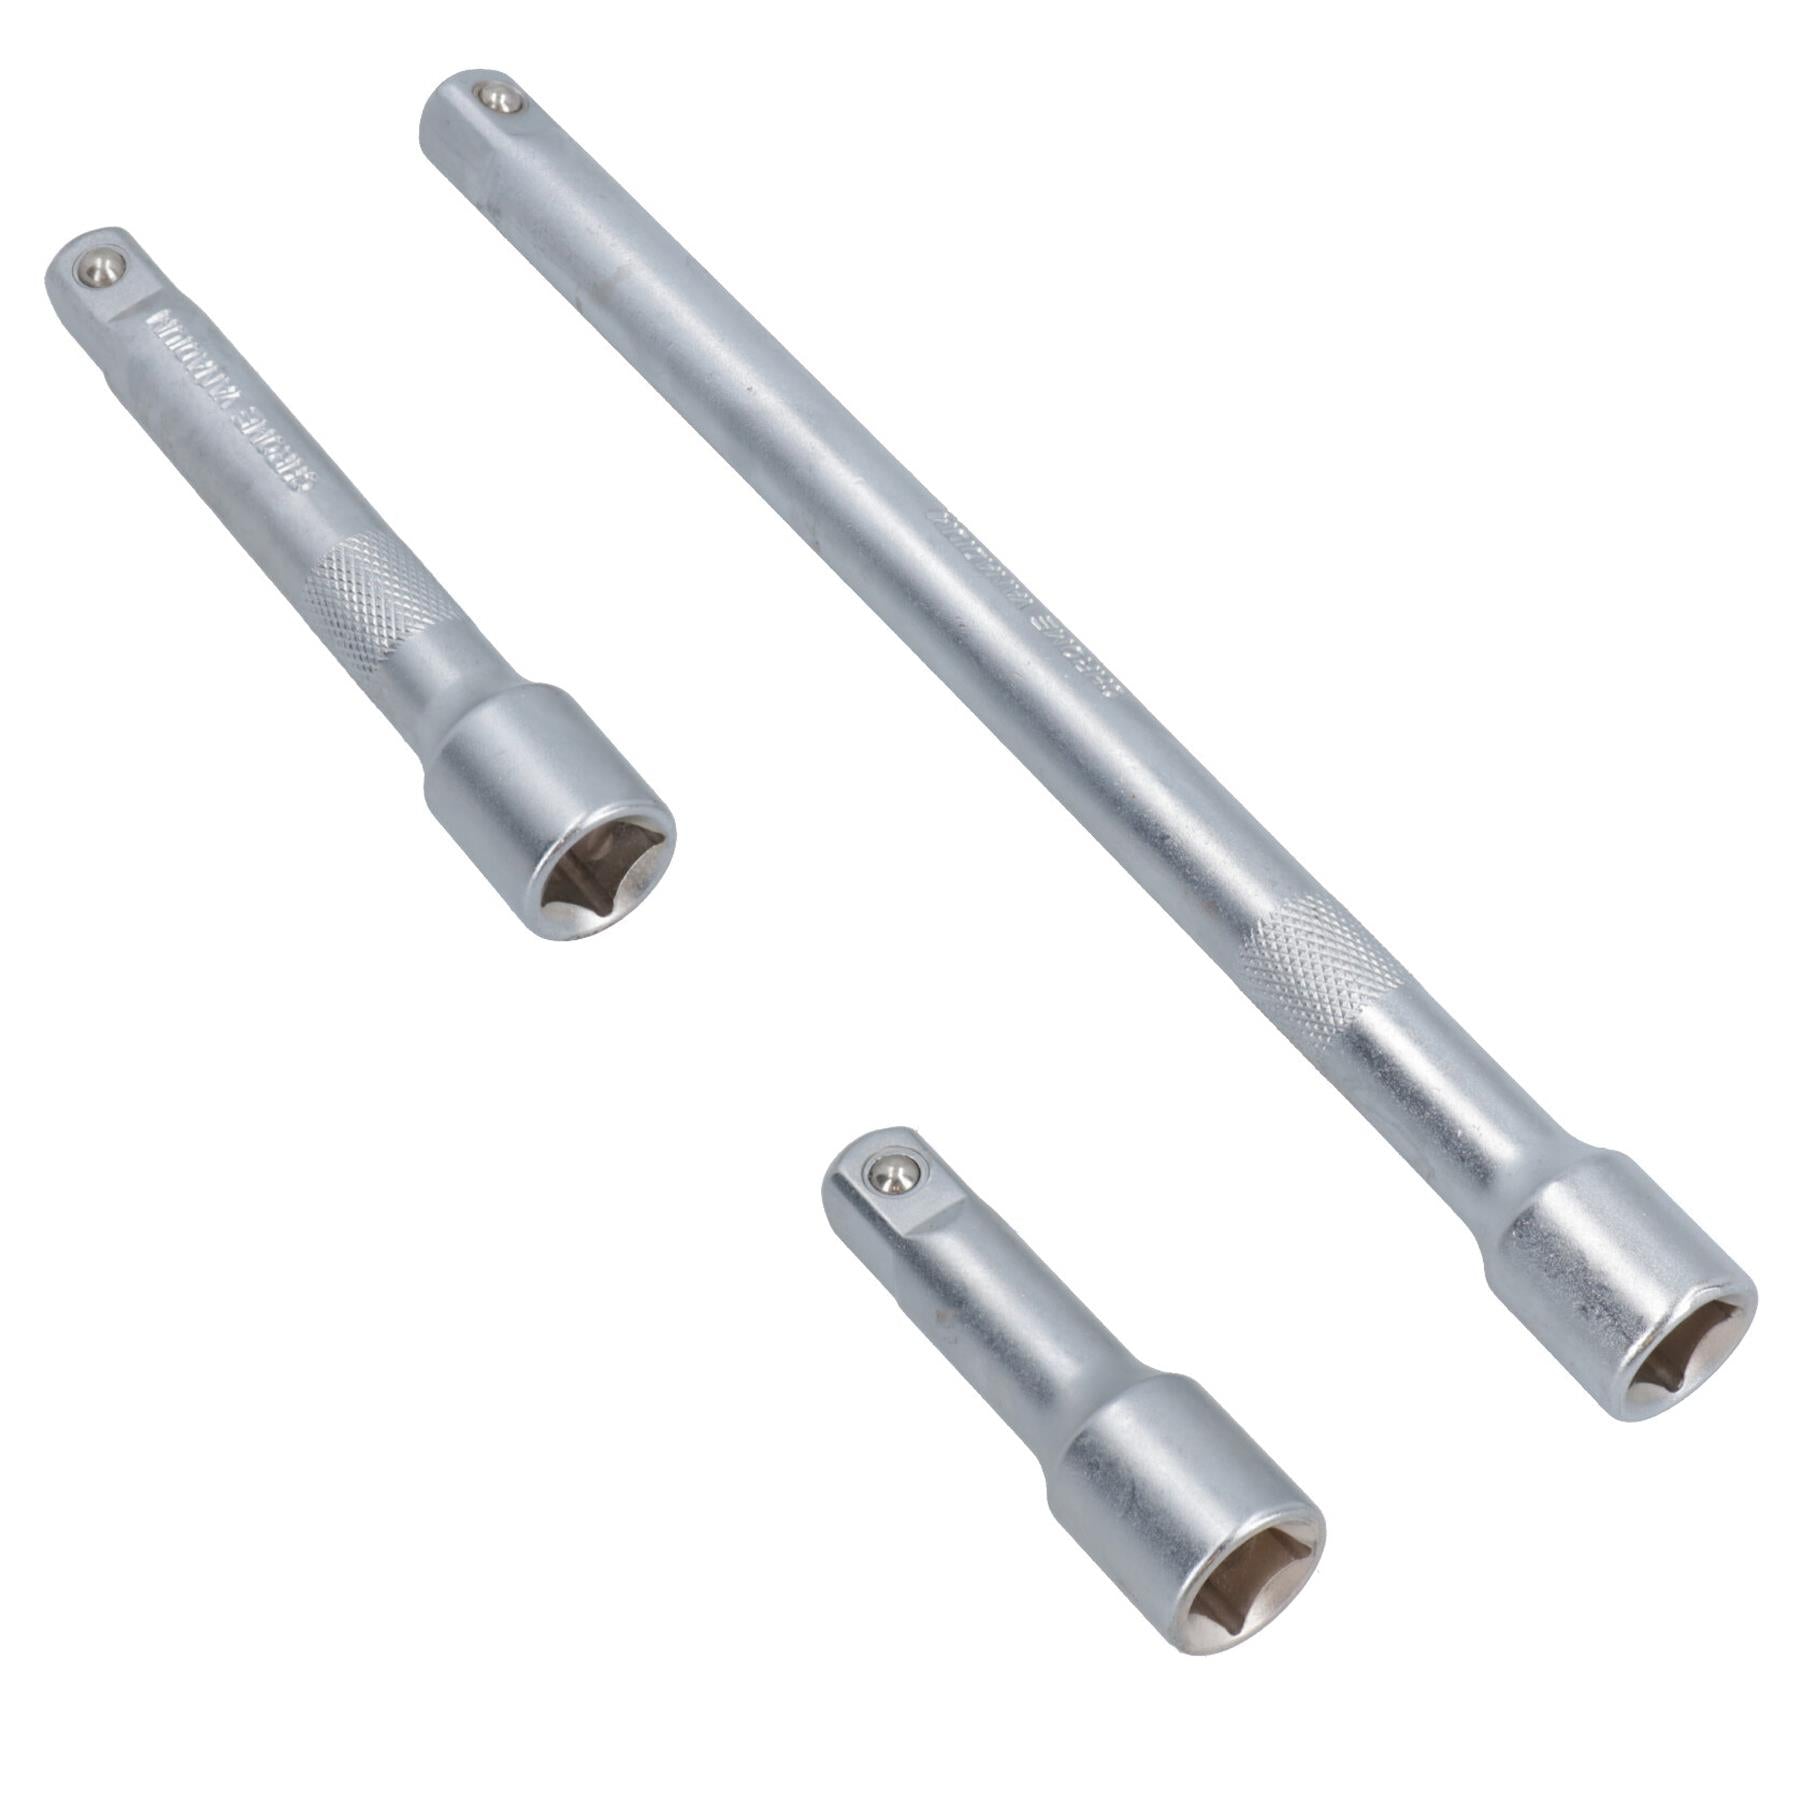 1/2" Drive Extension Bars